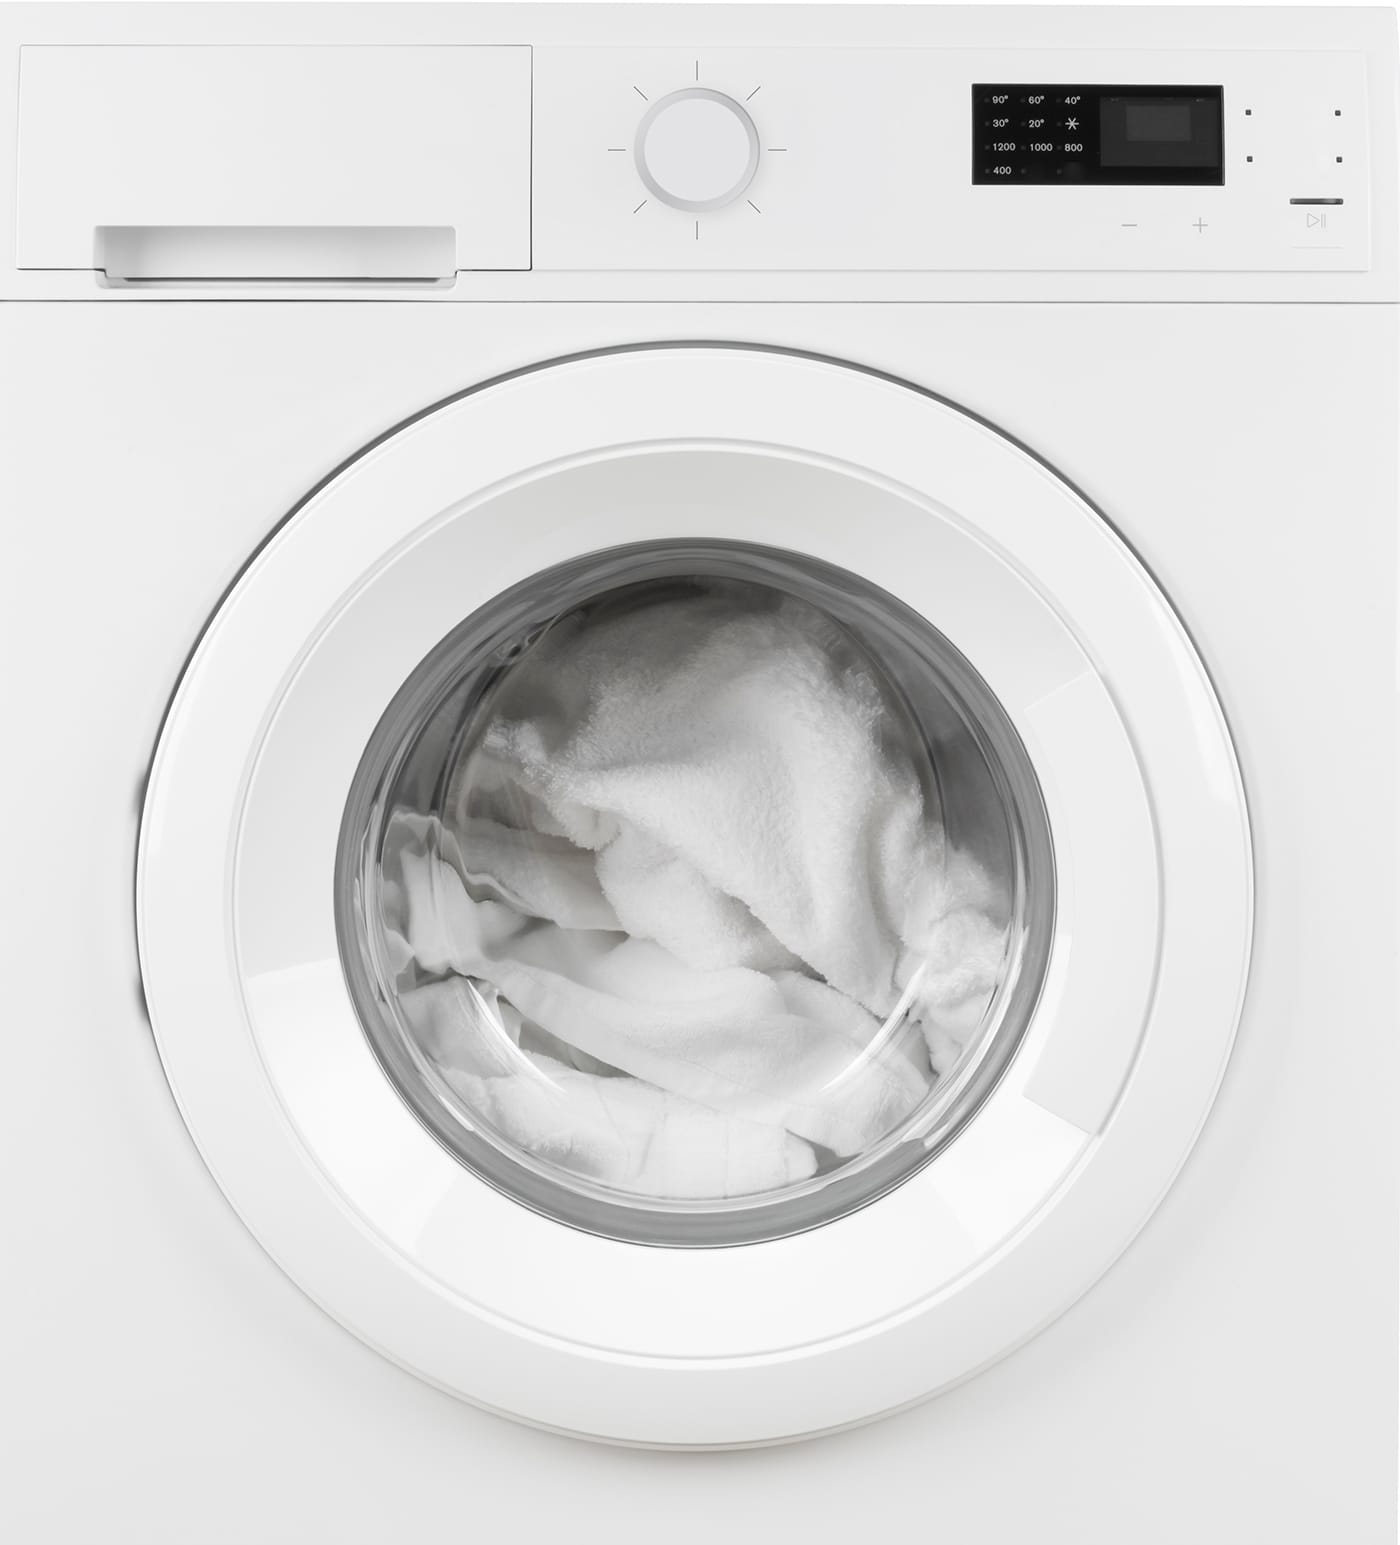 Washing Machines: Complexity and Space Considerations